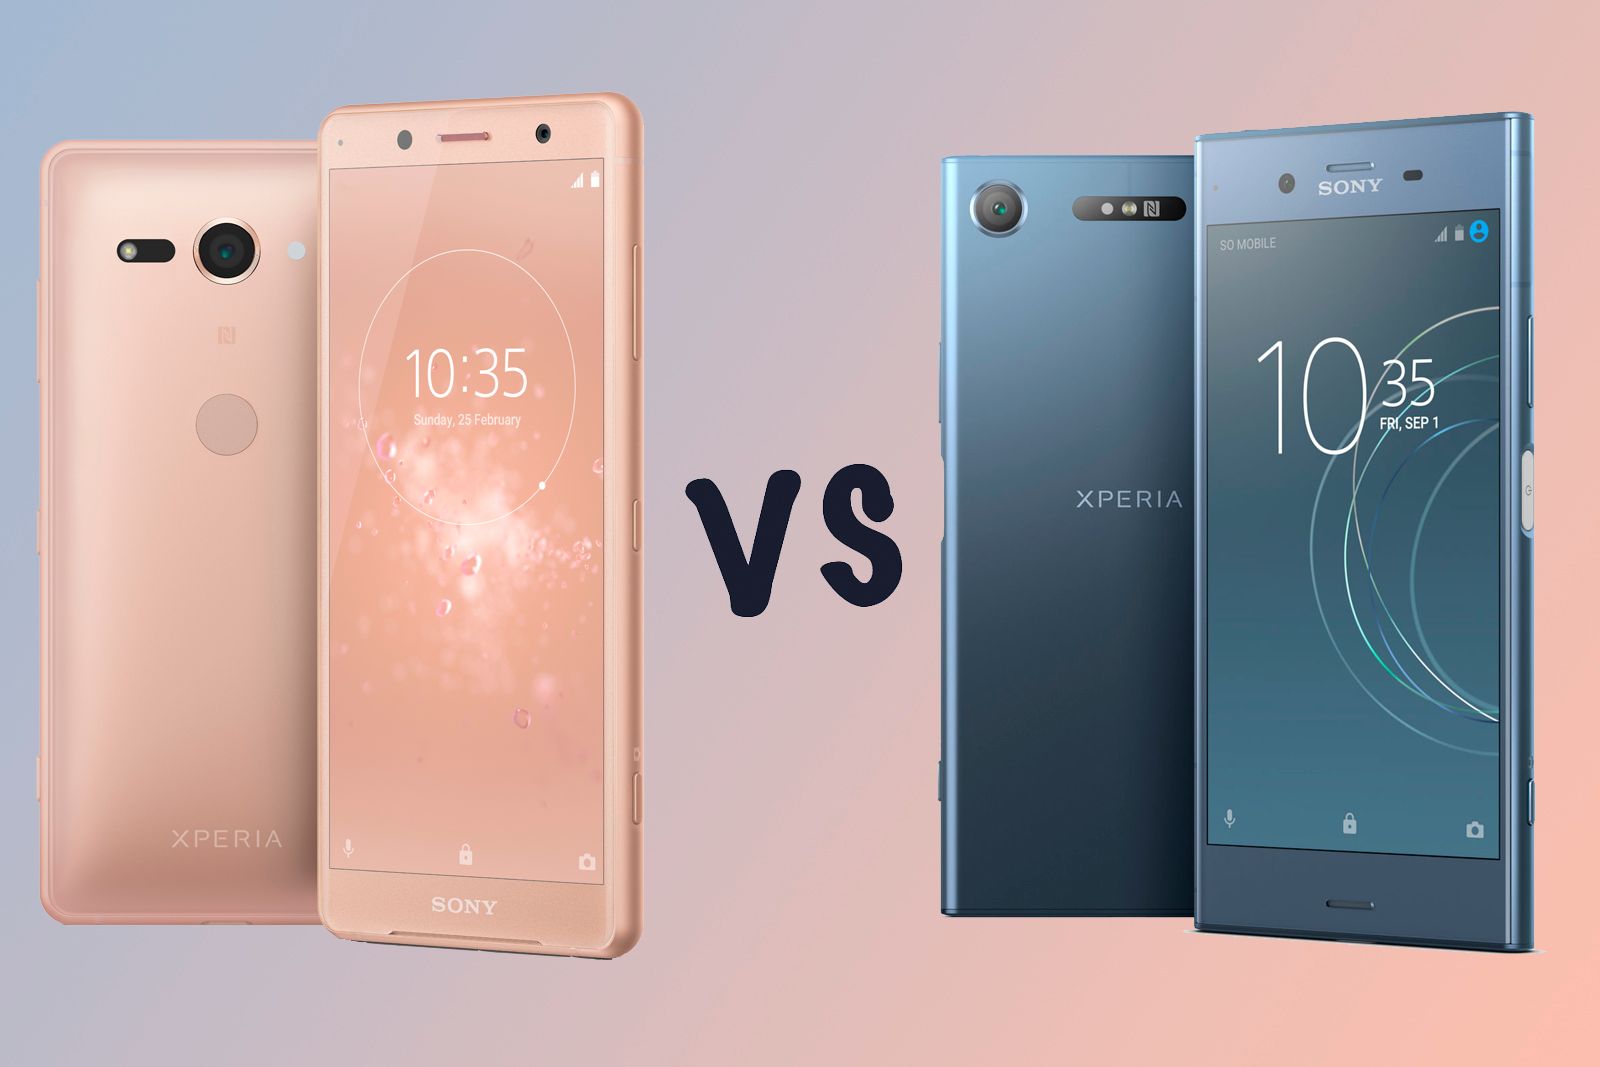 Sony Xperia XZ2 Compact vs XZ1 Compact: What's the difference?